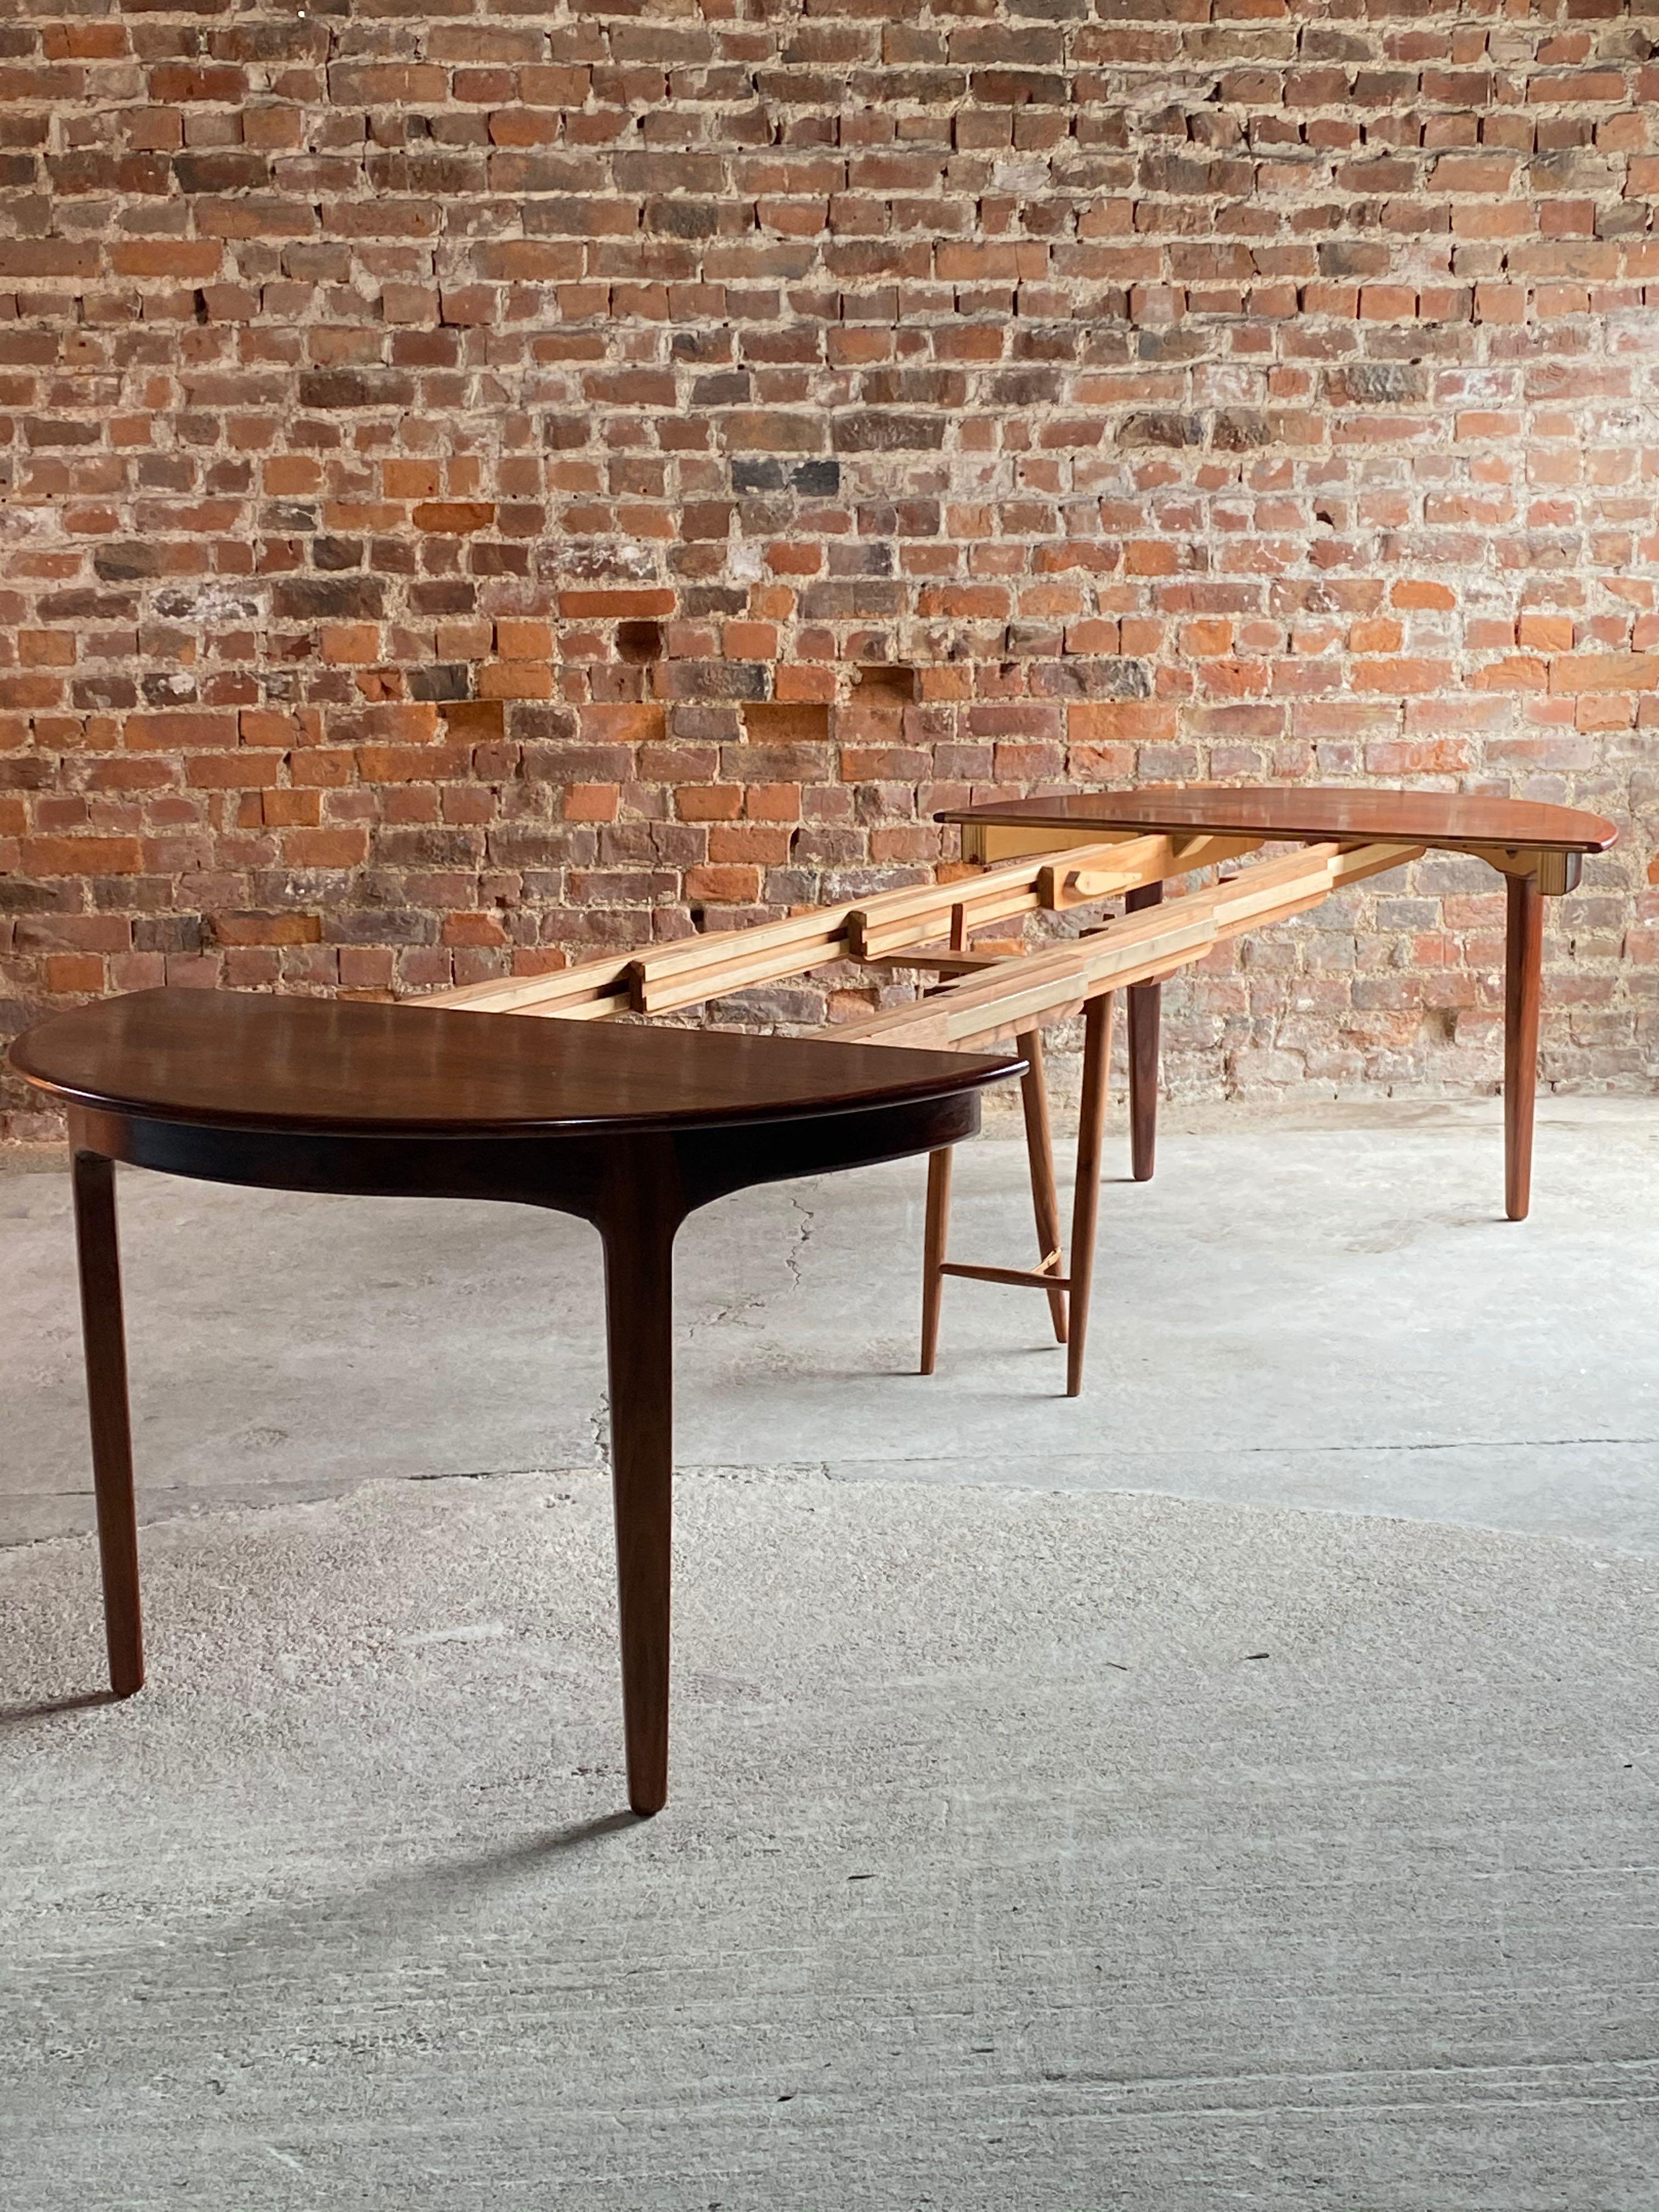 Henning Kjaenulf Brazilian rosewood dining table model 62 by Soro Stolefabrik, Denmark, 1962

Monumental Henning Kjaenulf by Soro Stolefabrik Brazilian rosewood dining table model 62, Denmark, 1962. This table extends from a four seater to a